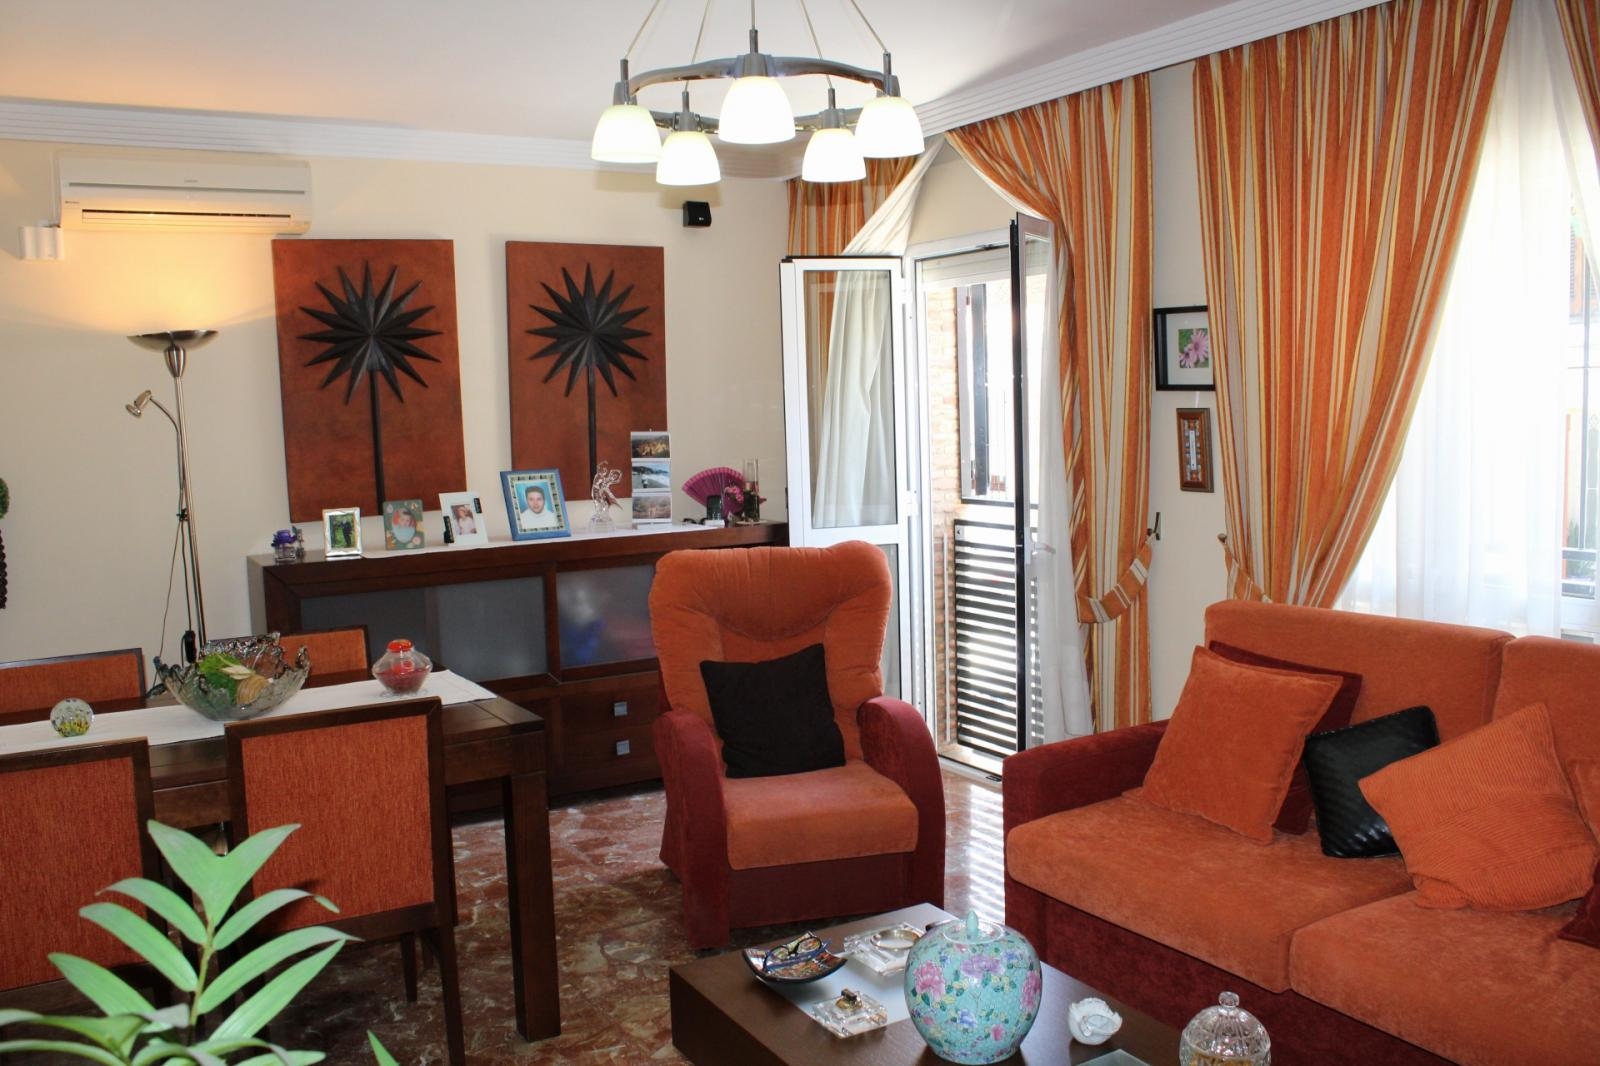 Apartment for sale in Nerja with separate studio and garage